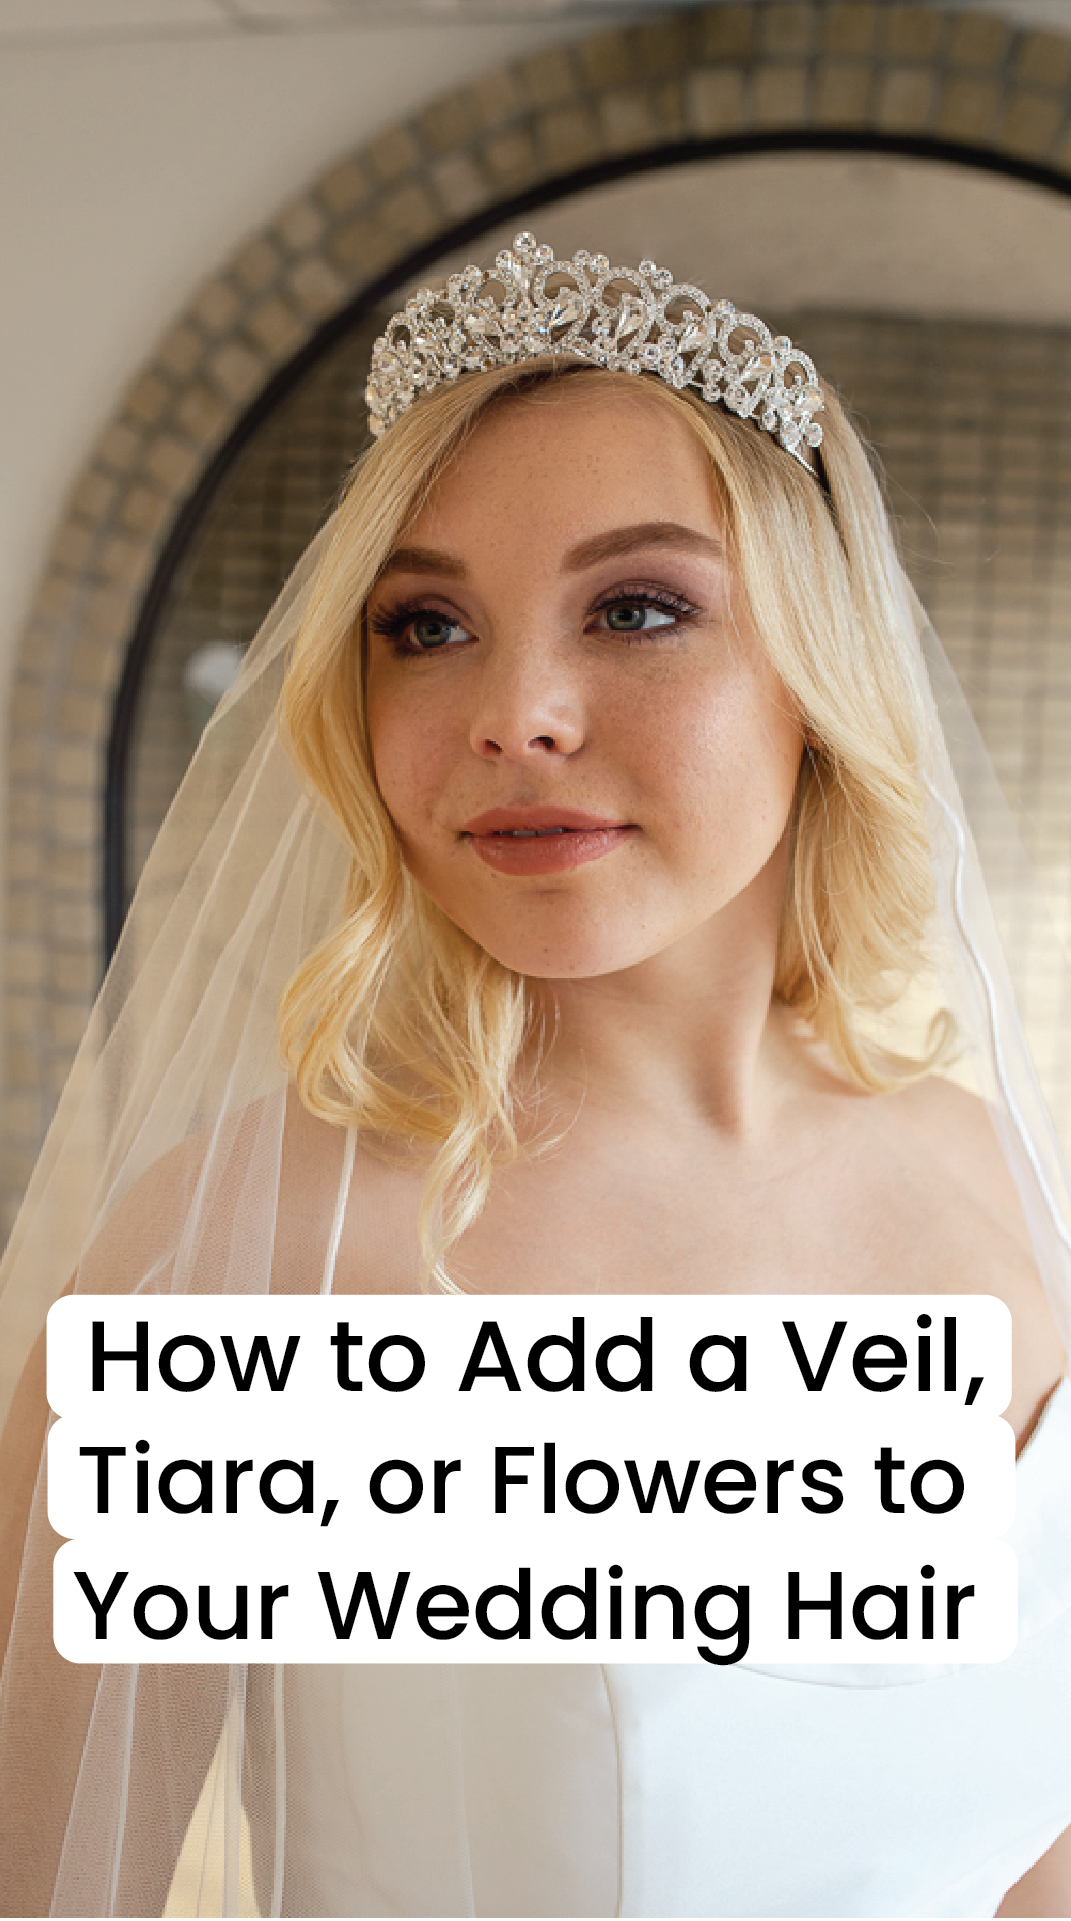 How to Add a Veil, Tiara or Flowers to Your Wedding Hair - Wed Mayhem